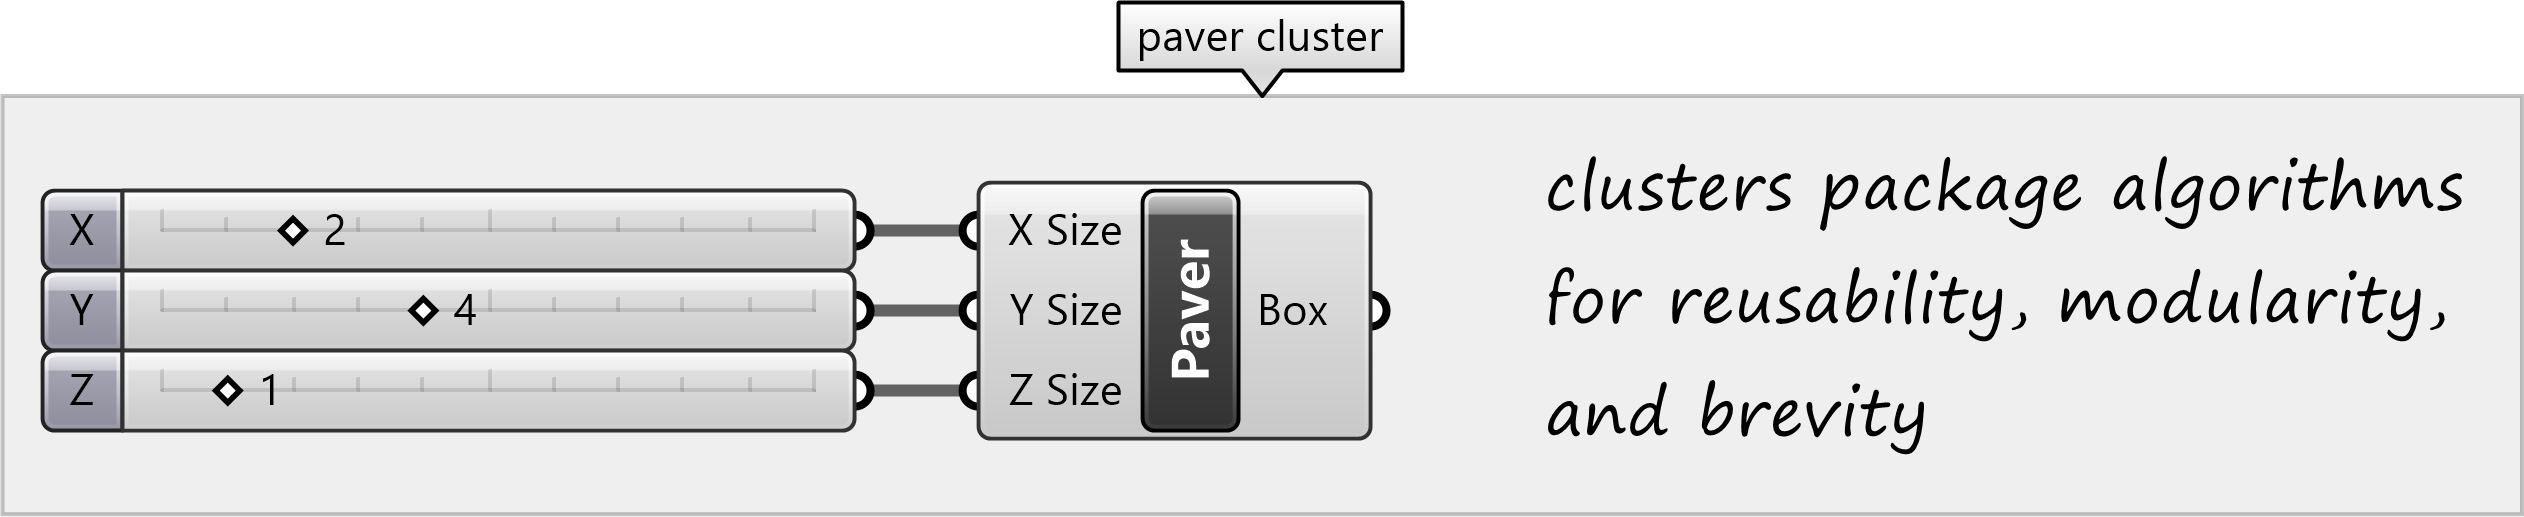 Paving cluster